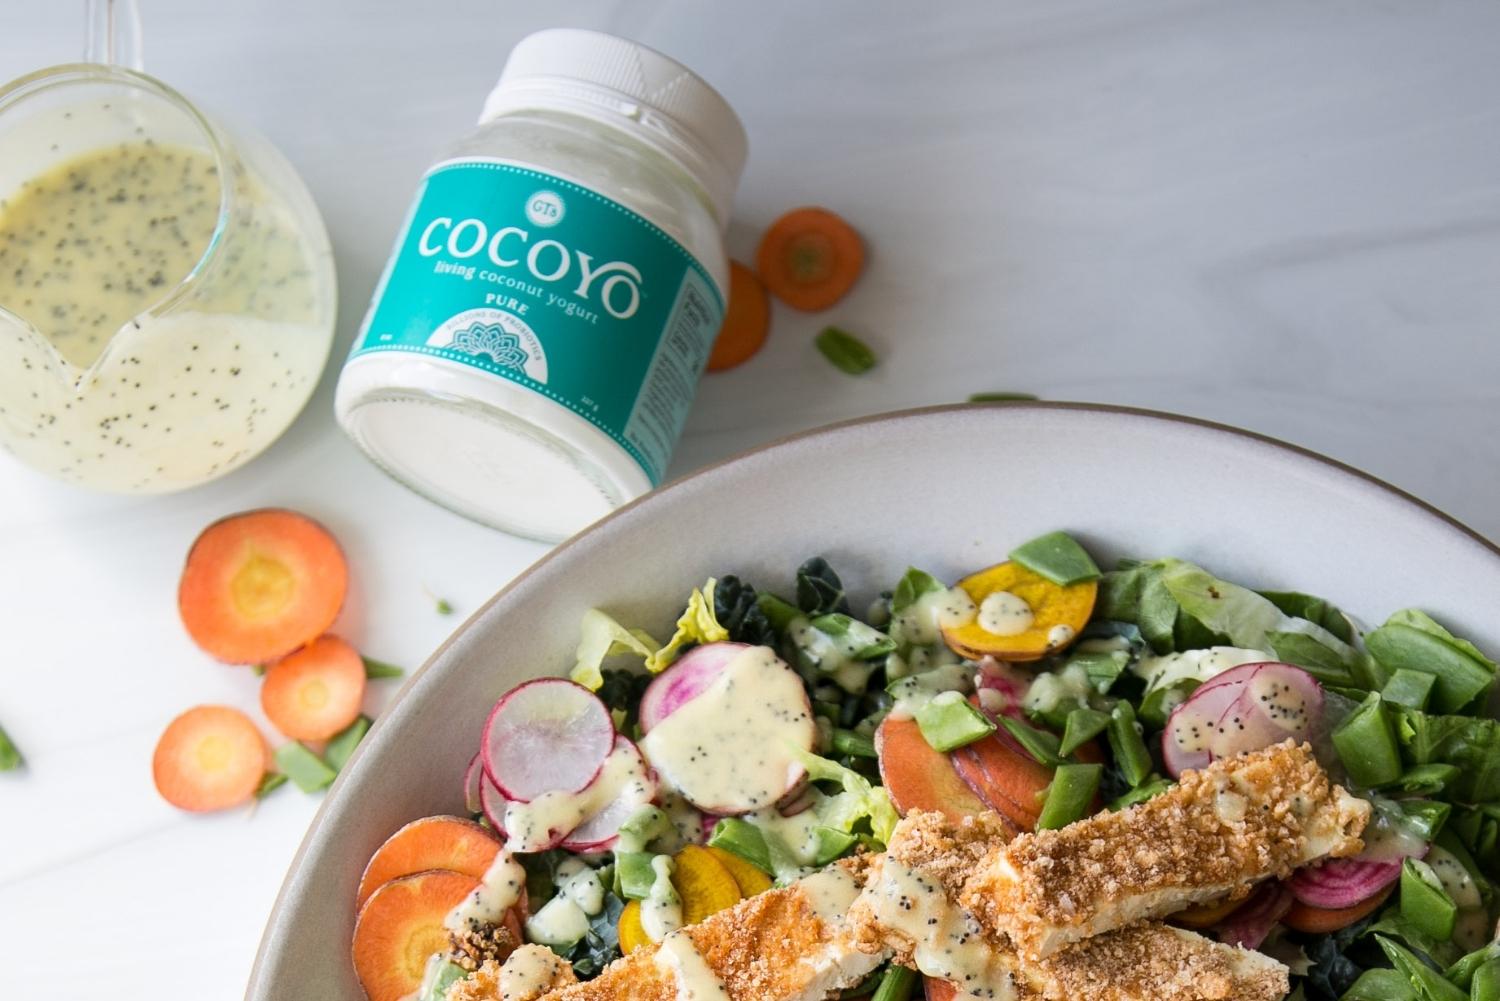 Crispy Baked Tofu Salad and Creamy Lemon Poppy Dressing with COCOYO Pure by Chef Phoebe Lapine